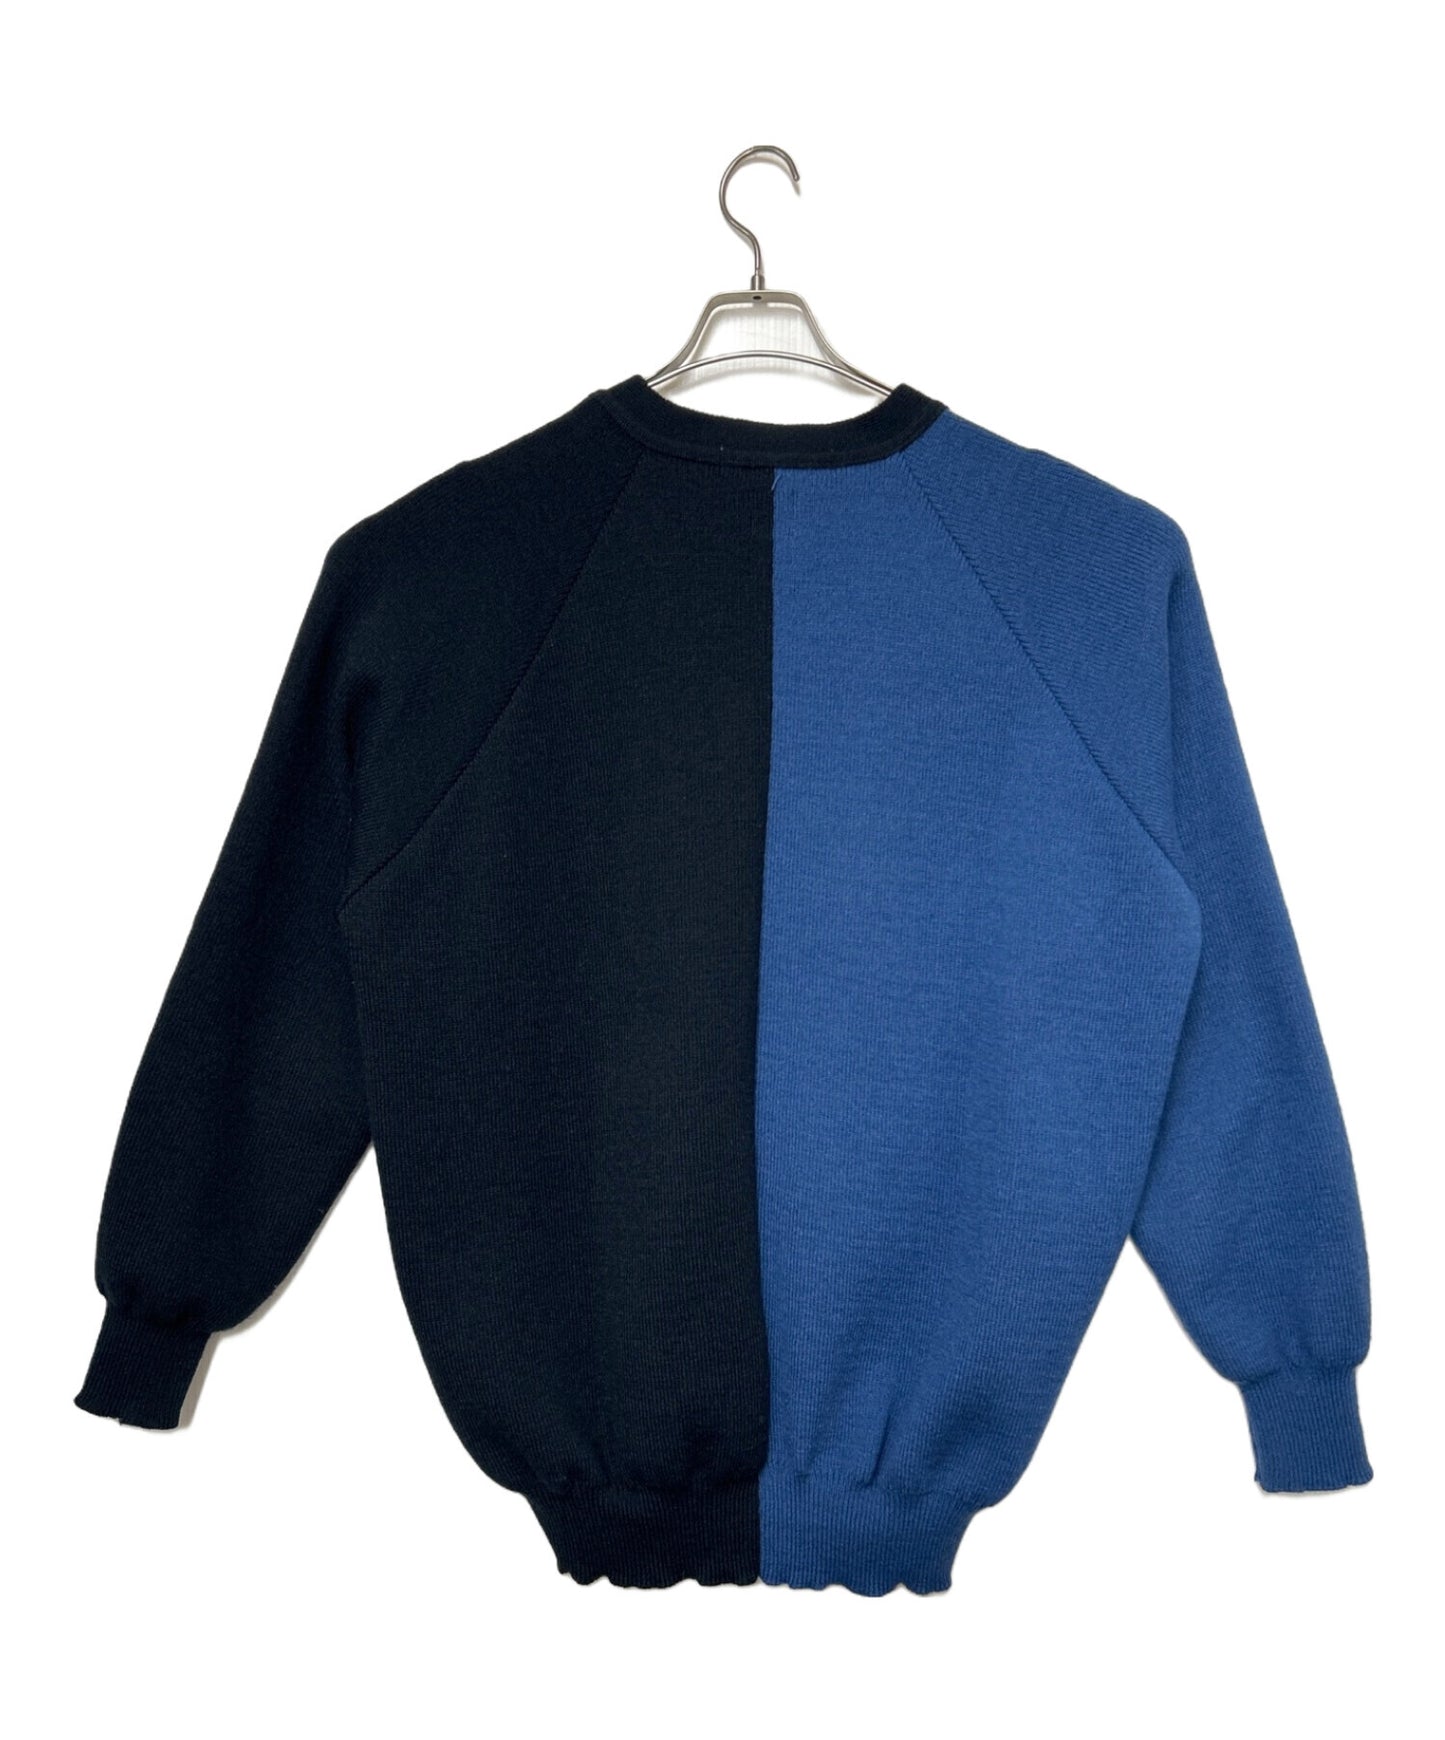 [Pre-owned] COMME des GARCONS SHIRT Lochaven of Scotland oversize cardigan FH-N501